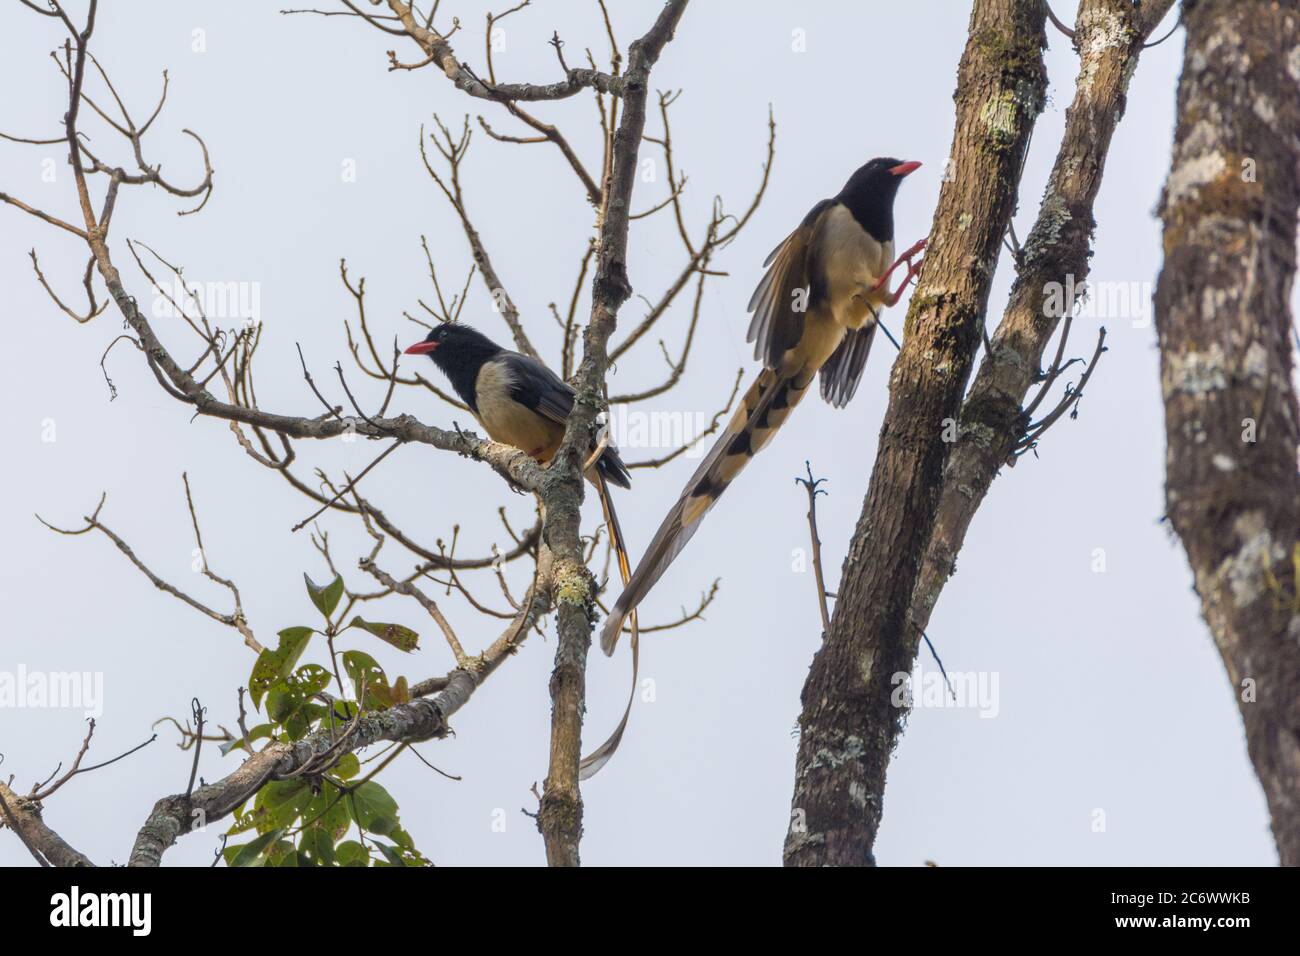 Two Long tail blue magpie birds on tree branch Stock Photo